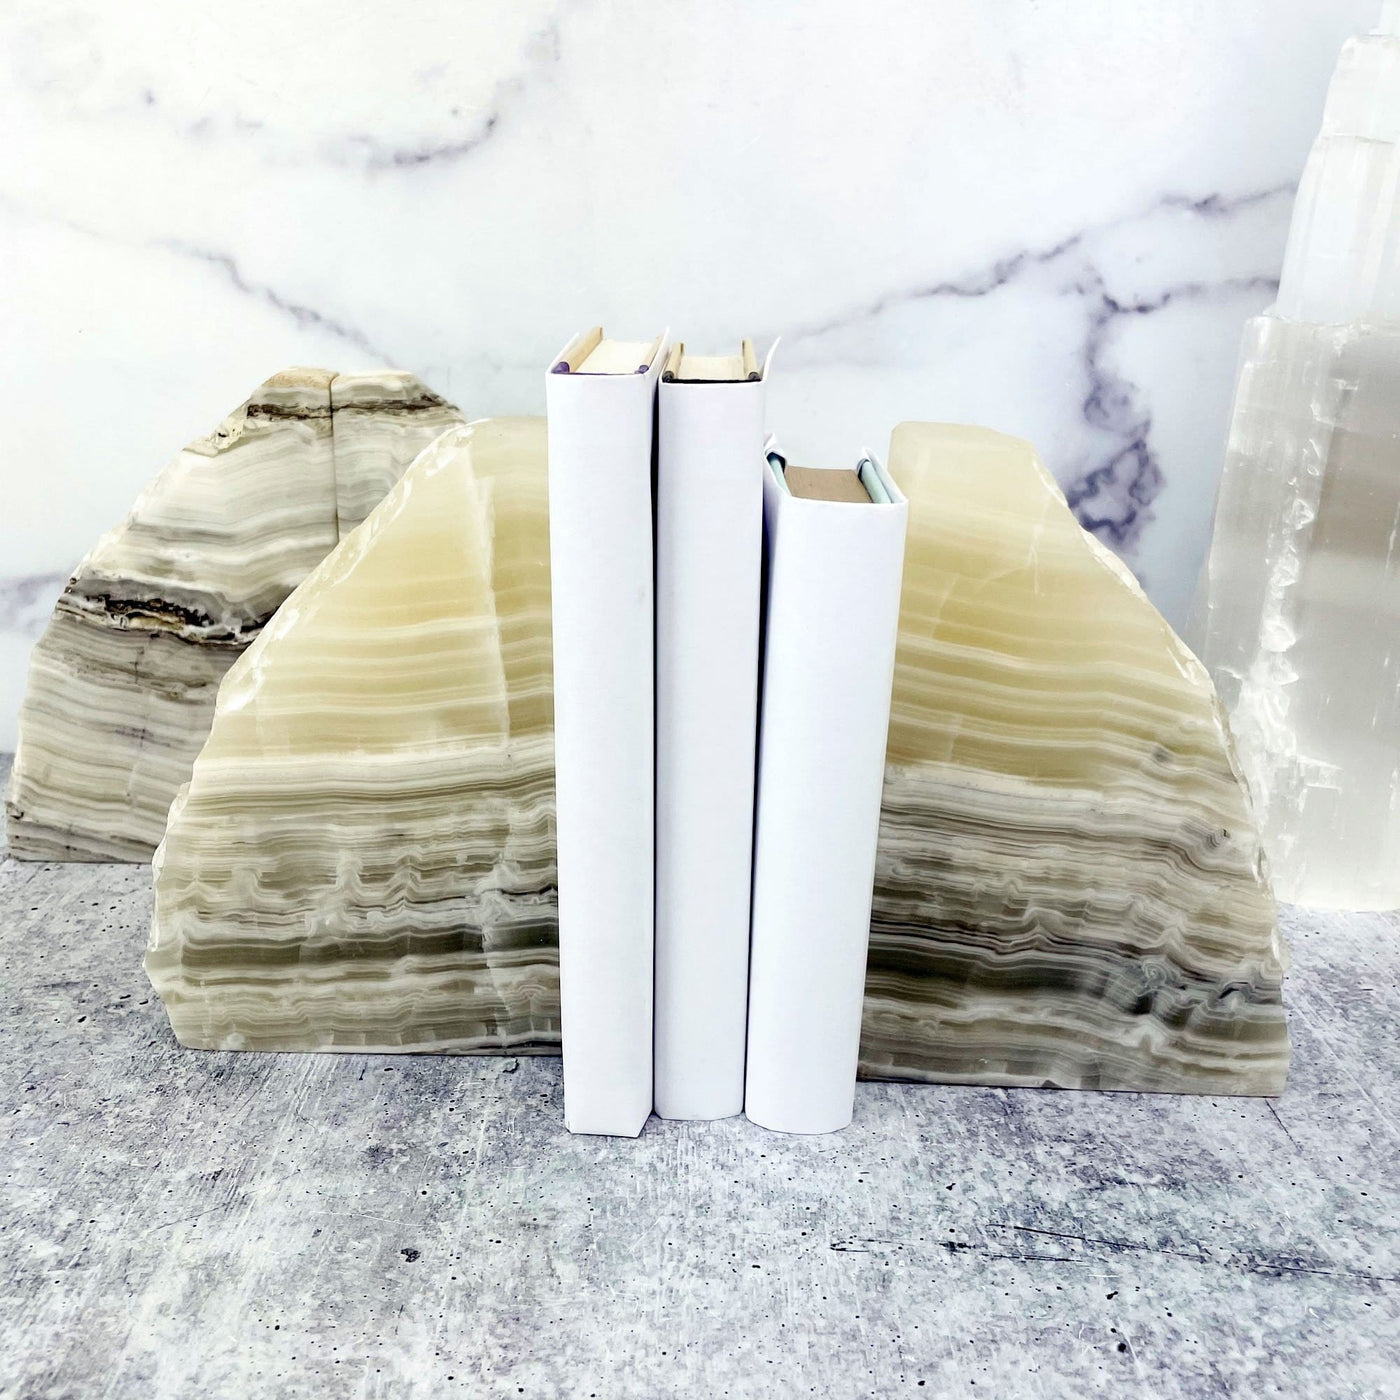 Products Onyx Bookends - with books in between